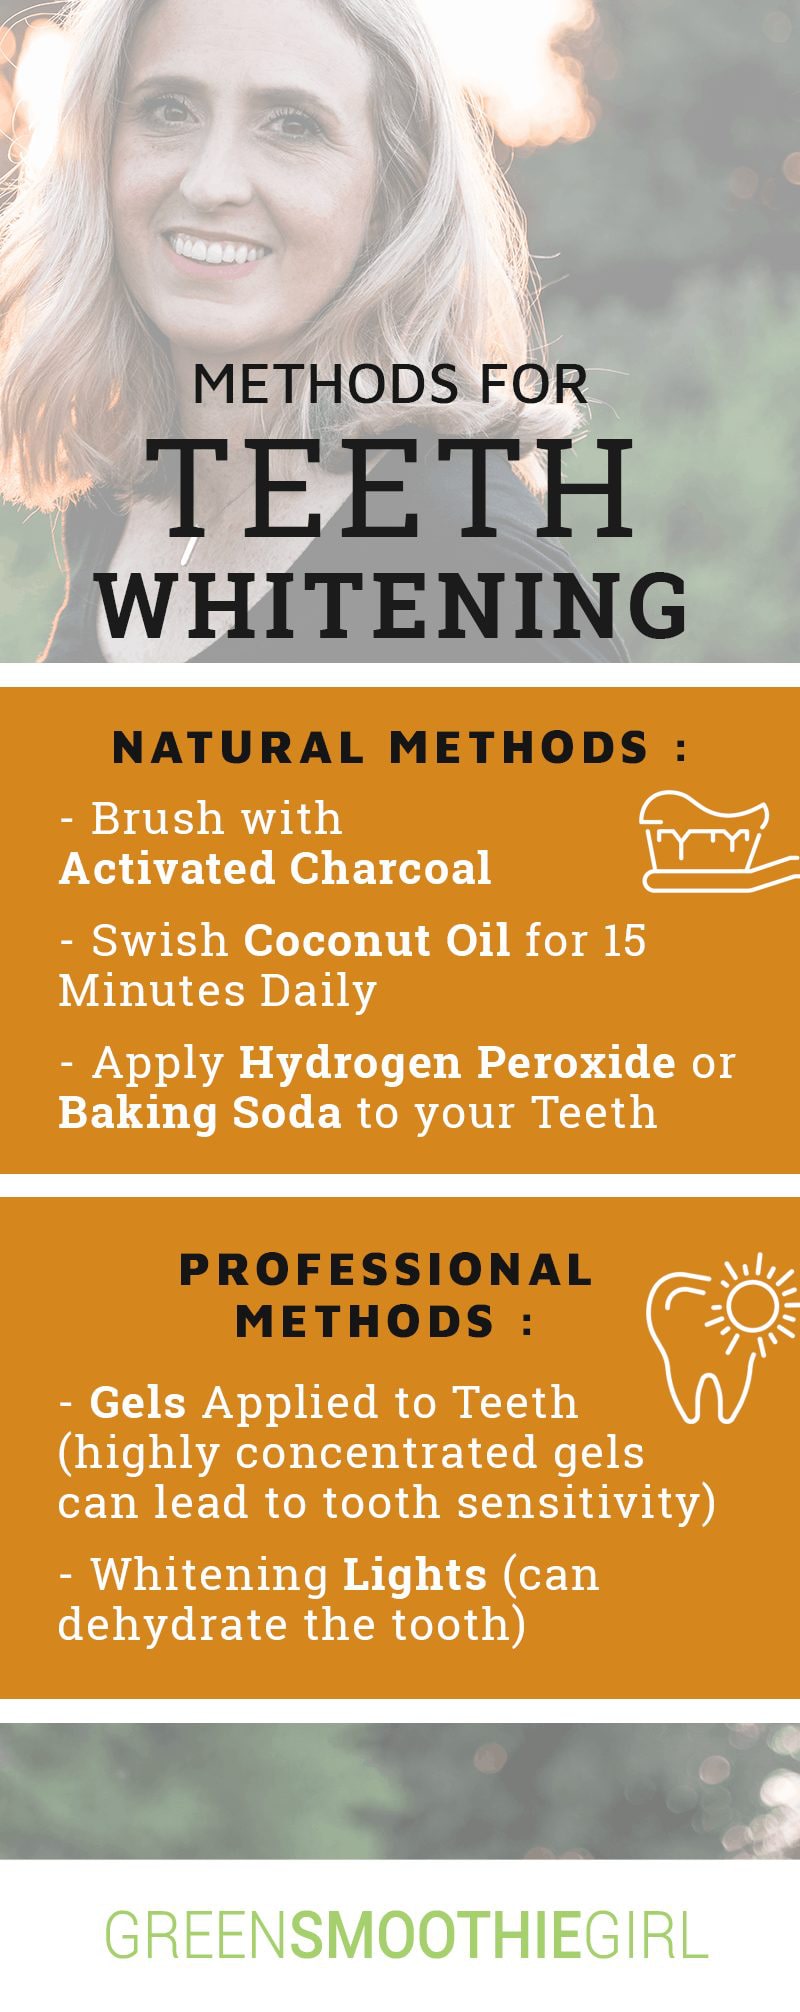 Methods for Natural Teeth Whitening | Green Smoothie Girl